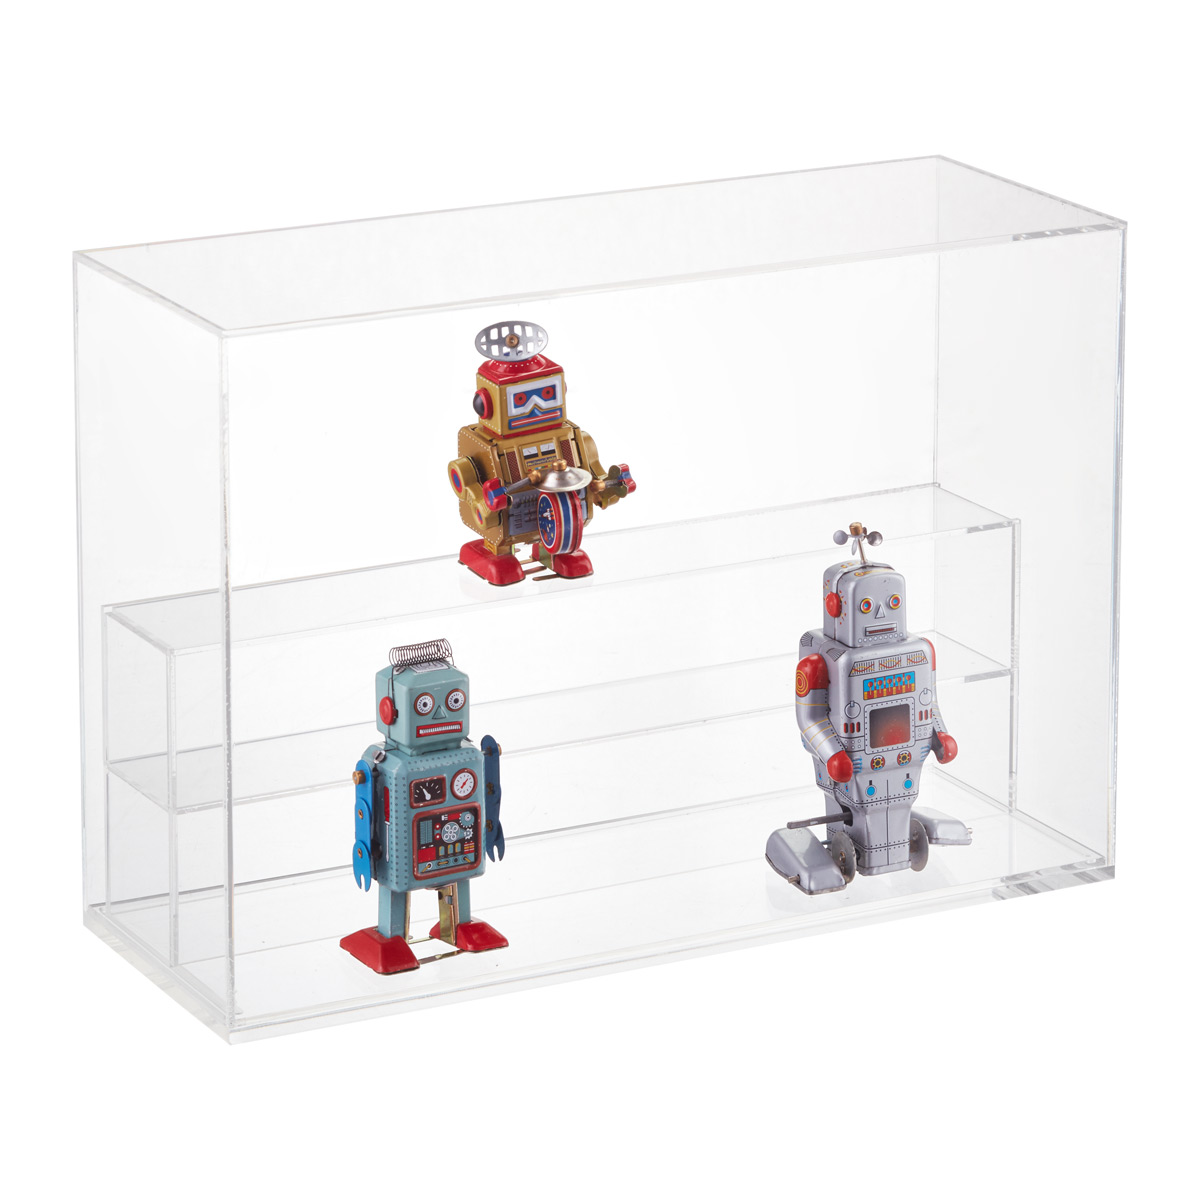 Large Modular Clear Acrylic Premium Display Case | The Container Store